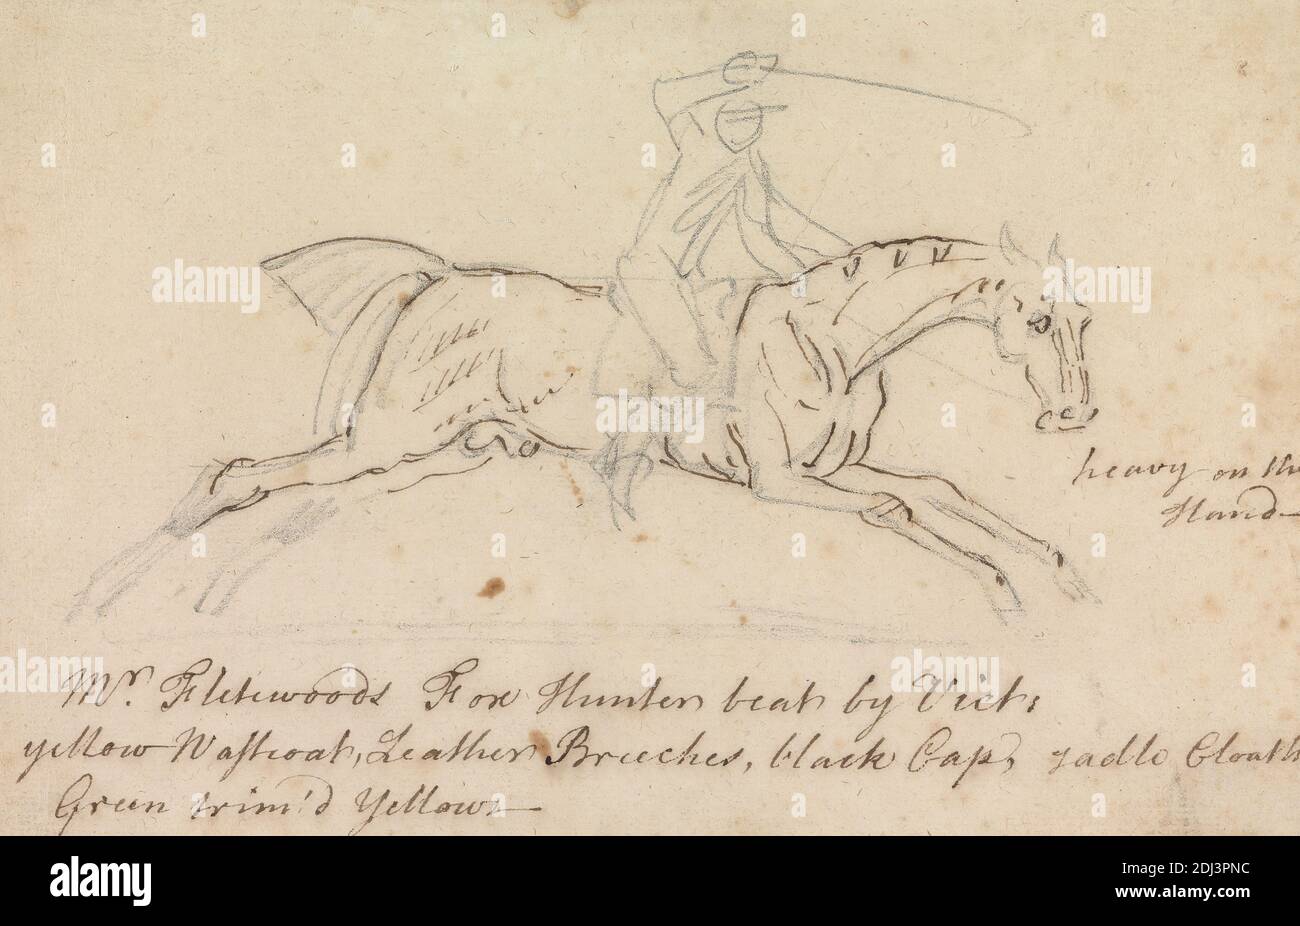 Foxhunter, with Jockey Up, James Seymour, 1702–1752, British, undated, Graphite and pen and brown ink on medium, moderately textured, beige, laid paper, Sheet: 5 7/16 × 8 5/16 inches (13.8 × 21.1 cm), figure study, horse (animal), horse racing, jockey, man, sporting art, whip Stock Photo